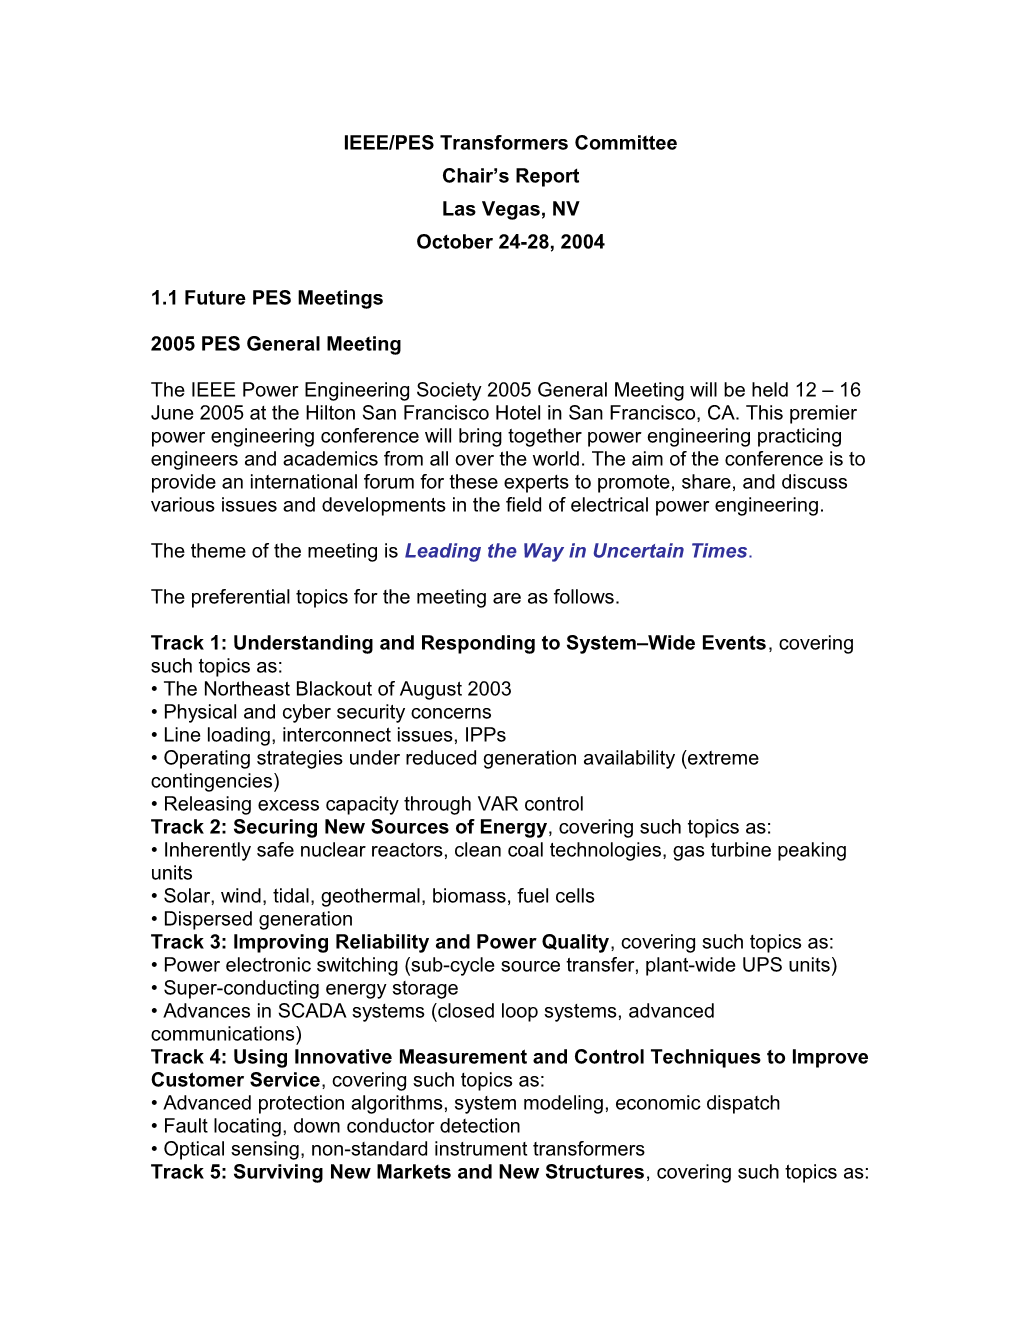 IEEE/PES Transformers Committee Spring 2004 Chairs Report